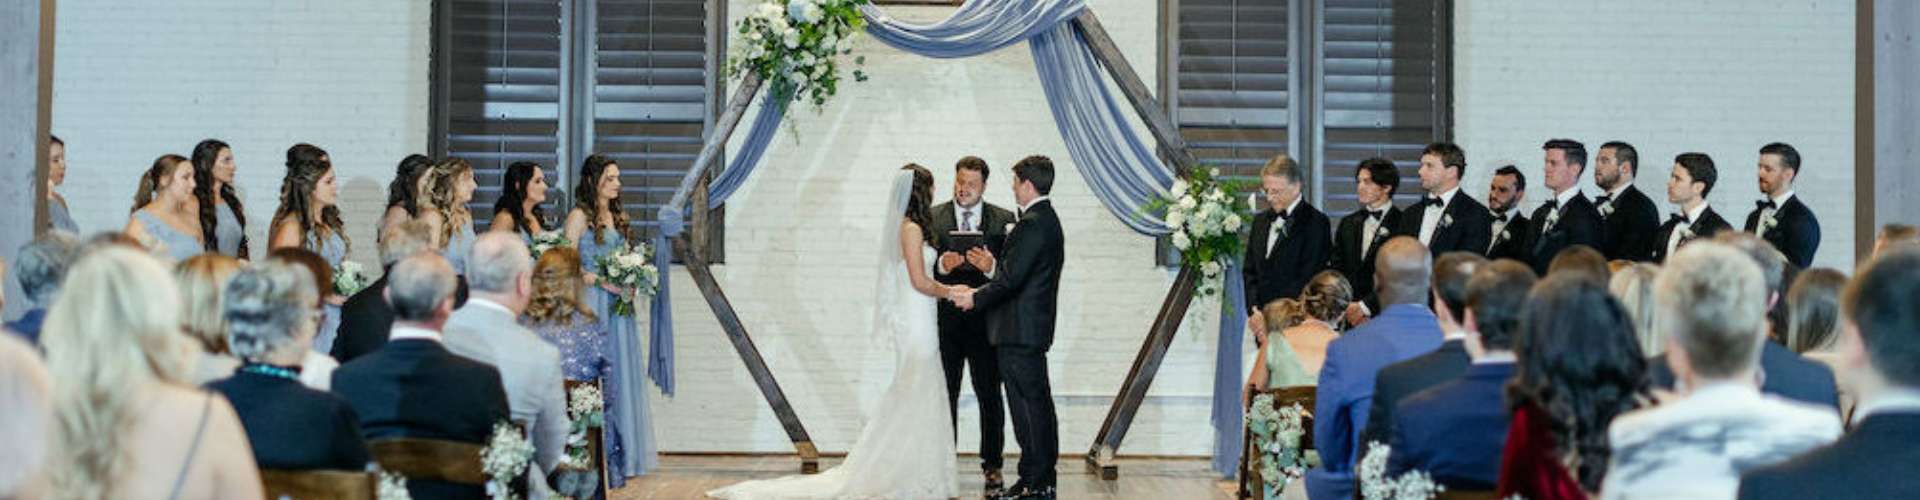 Wedding ceremony inside The Chair Factory industrial wedding venue